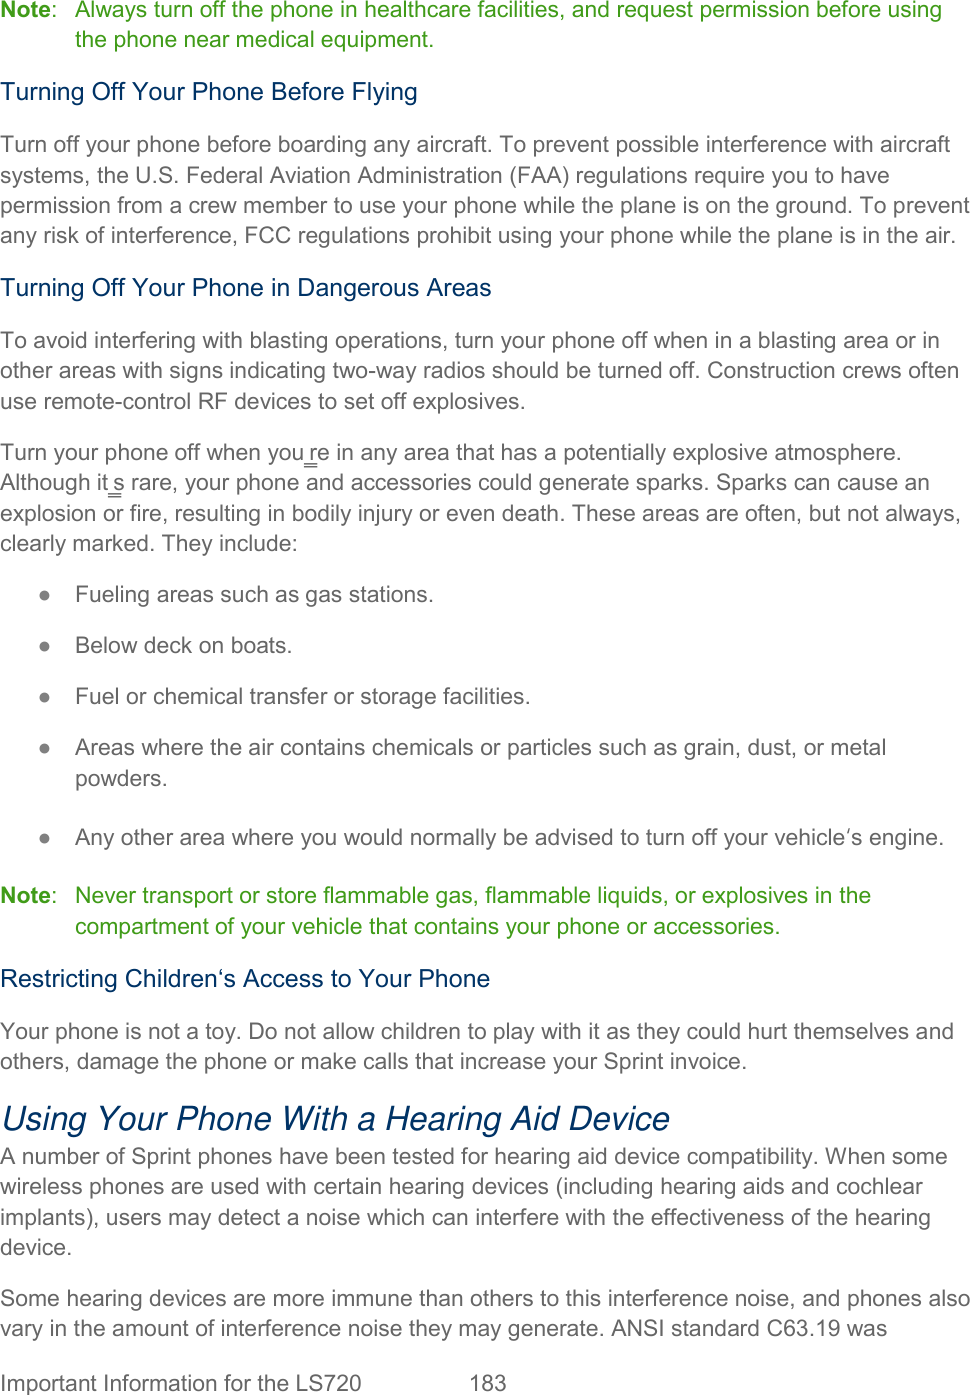  Important Information for the LS720  183   Note:   Always turn off the phone in healthcare facilities, and request permission before using the phone near medical equipment. Turning Off Your Phone Before Flying Turn off your phone before boarding any aircraft. To prevent possible interference with aircraft systems, the U.S. Federal Aviation Administration (FAA) regulations require you to have permission from a crew member to use your phone while the plane is on the ground. To prevent any risk of interference, FCC regulations prohibit using your phone while the plane is in the air. Turning Off Your Phone in Dangerous Areas To avoid interfering with blasting operations, turn your phone off when in a blasting area or in other areas with signs indicating two-way radios should be turned off. Construction crews often use remote-control RF devices to set off explosives. Turn your phone off when you‗re in any area that has a potentially explosive atmosphere. Although it‗s rare, your phone and accessories could generate sparks. Sparks can cause an explosion or fire, resulting in bodily injury or even death. These areas are often, but not always, clearly marked. They include: ●  Fueling areas such as gas stations. ●  Below deck on boats. ●  Fuel or chemical transfer or storage facilities. ●  Areas where the air contains chemicals or particles such as grain, dust, or metal powders. ●  Any other area where you would normally be advised to turn off your vehicle‘s engine. Note:   Never transport or store flammable gas, flammable liquids, or explosives in the compartment of your vehicle that contains your phone or accessories. Restricting Children‘s Access to Your Phone Your phone is not a toy. Do not allow children to play with it as they could hurt themselves and others, damage the phone or make calls that increase your Sprint invoice. Using Your Phone With a Hearing Aid Device A number of Sprint phones have been tested for hearing aid device compatibility. When some wireless phones are used with certain hearing devices (including hearing aids and cochlear implants), users may detect a noise which can interfere with the effectiveness of the hearing device. Some hearing devices are more immune than others to this interference noise, and phones also vary in the amount of interference noise they may generate. ANSI standard C63.19 was 